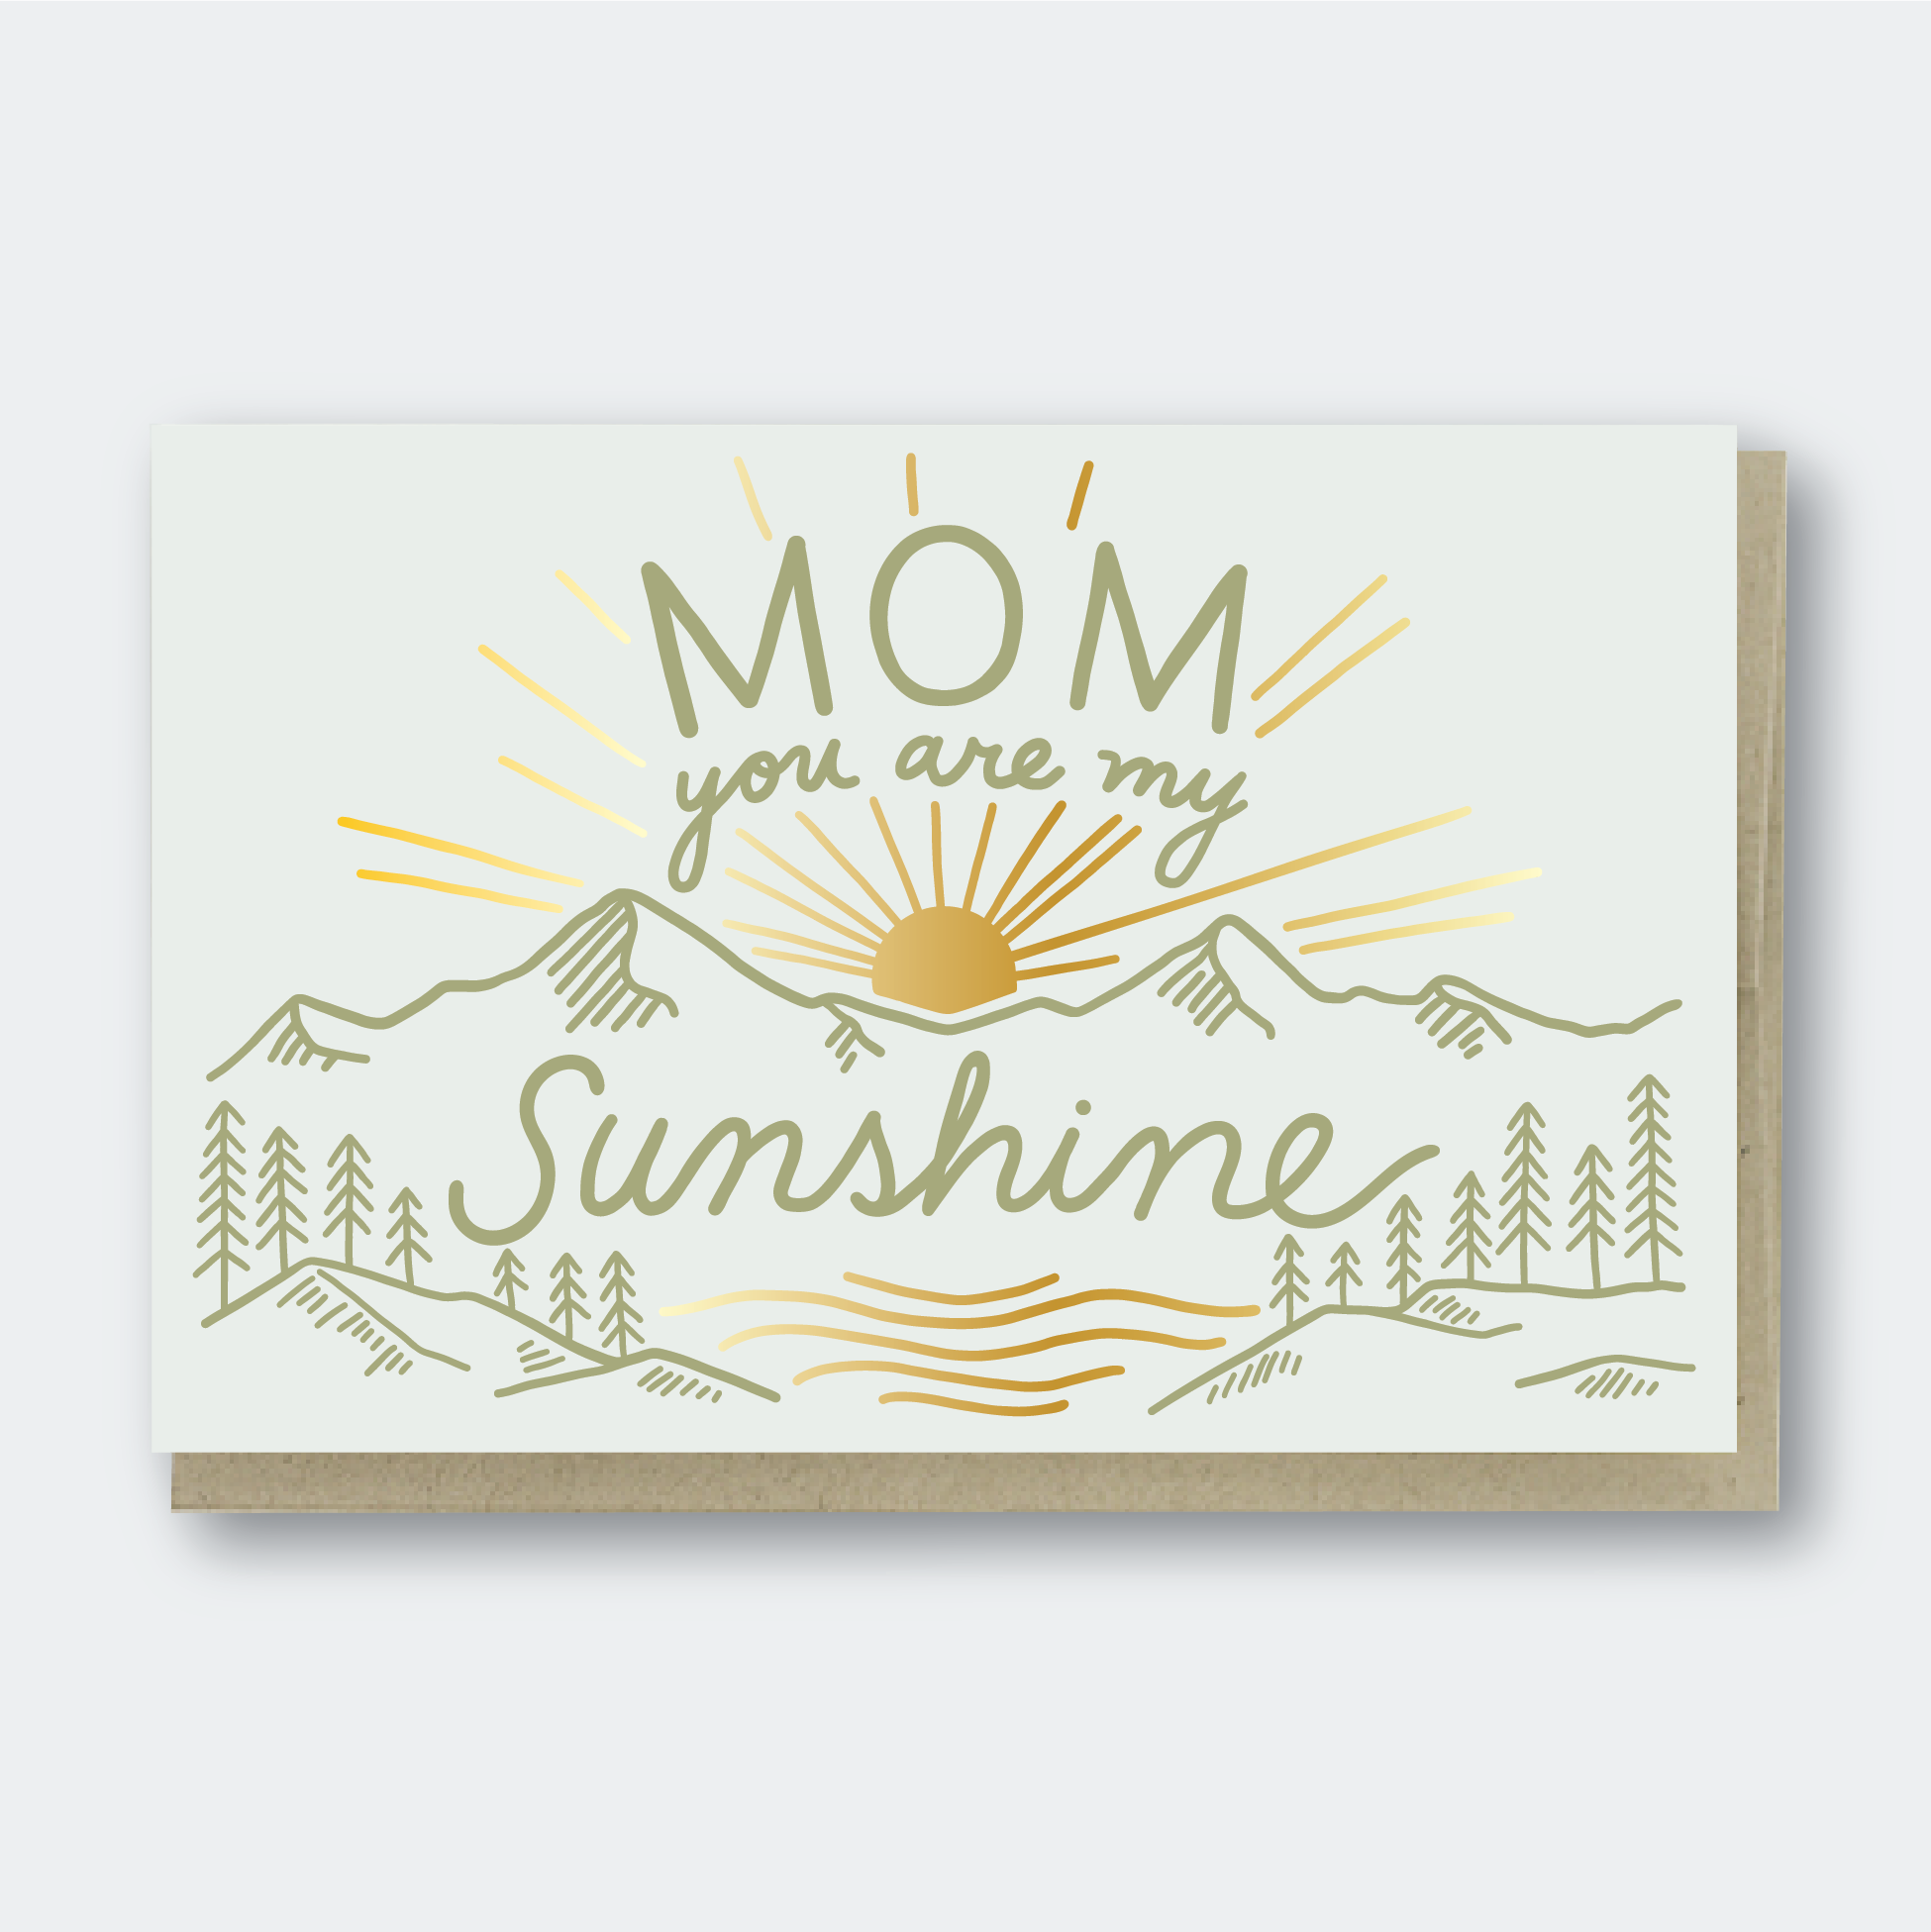 Mom You Are My Sunshine Letterpress Greeting Card Pike St. Press